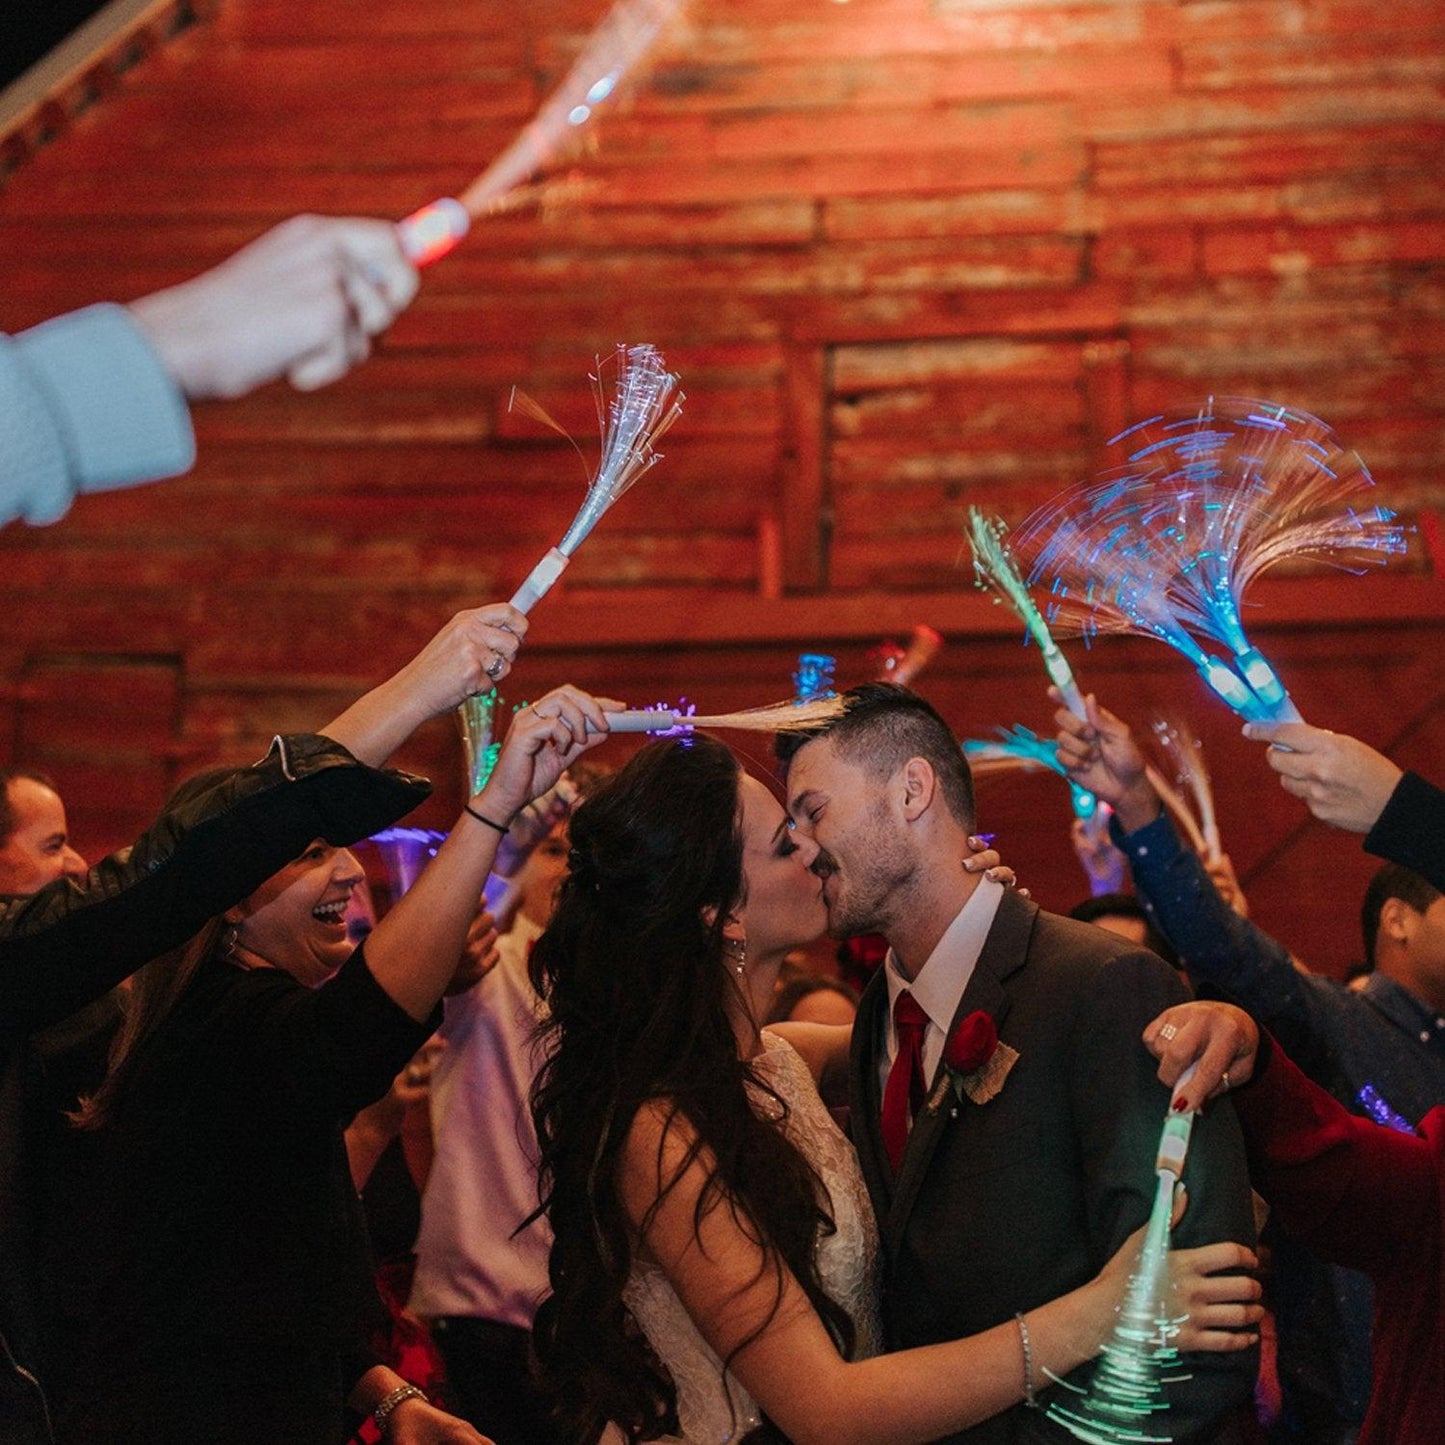 Great Alternative To Sparklers,Led Wedding Reception Send Off Ideas - If you say i do